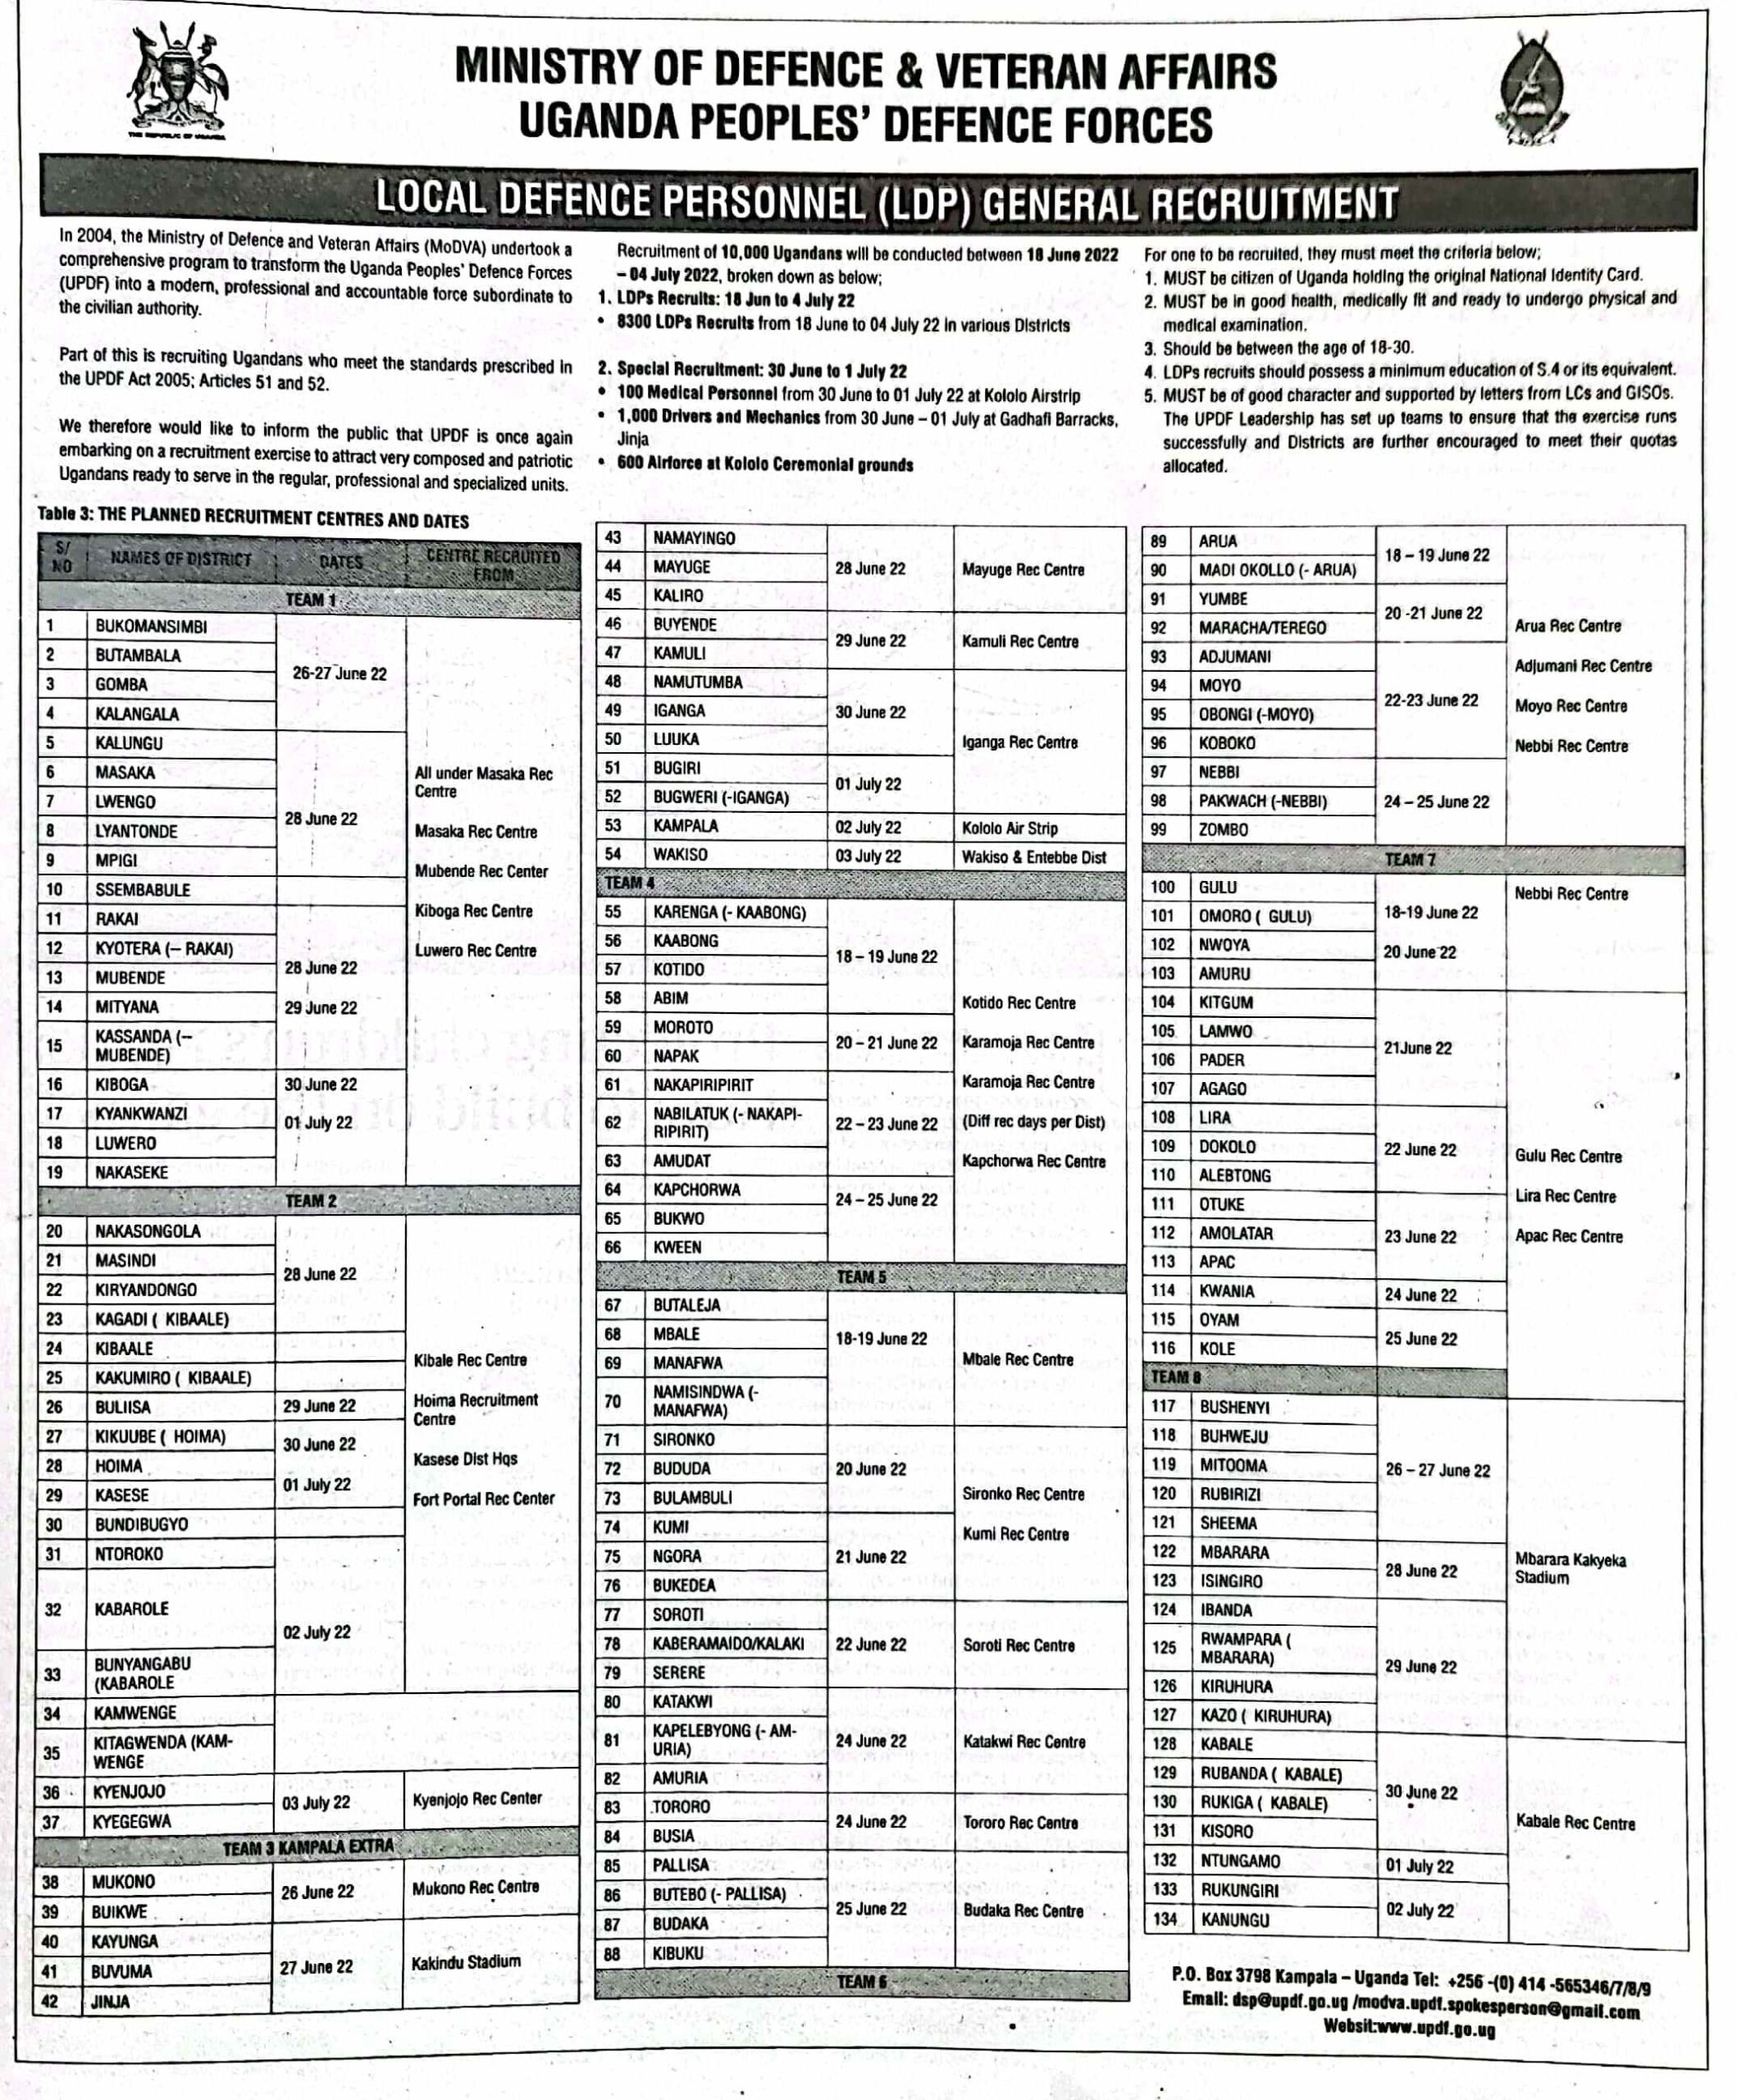 UPDF JOBS: See List of Recruitment Centres & Interview Dates